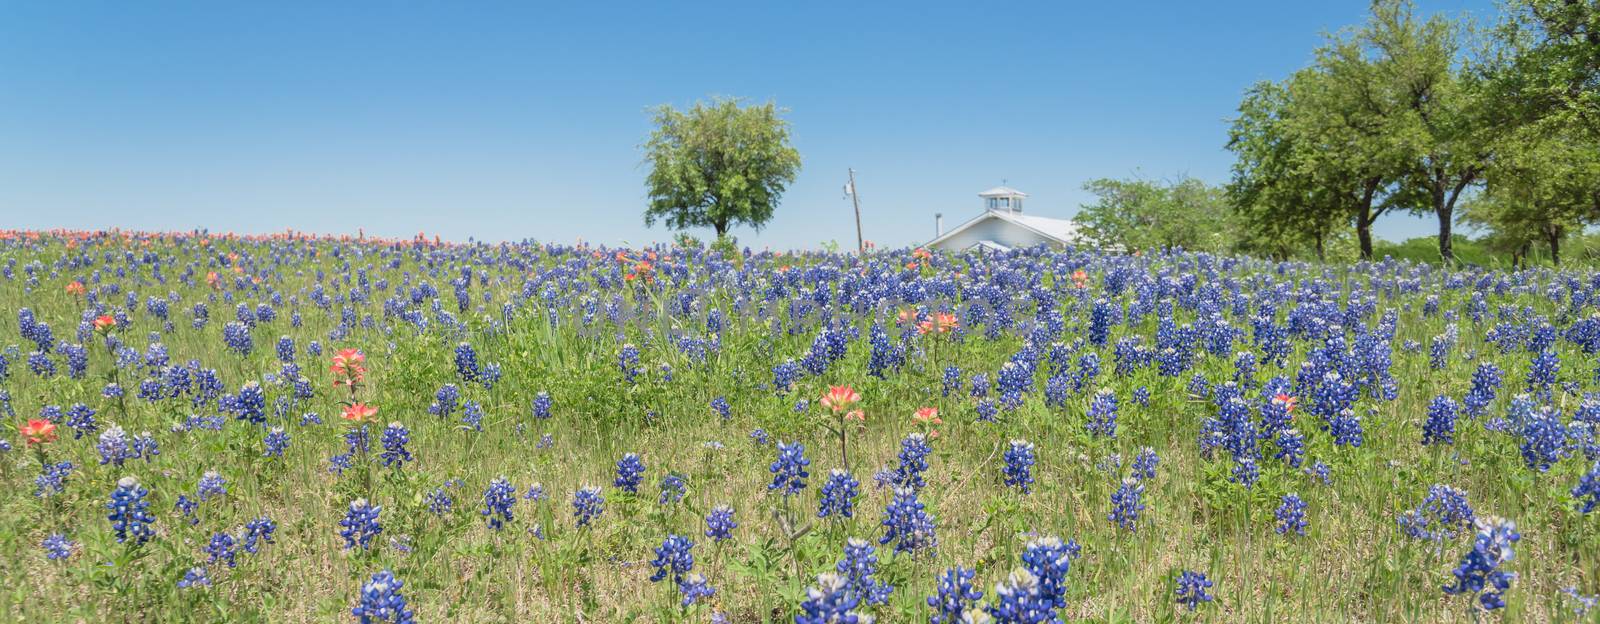 Panoramic view colorful Bluebonnet blossom at farm in North Texas, America by trongnguyen